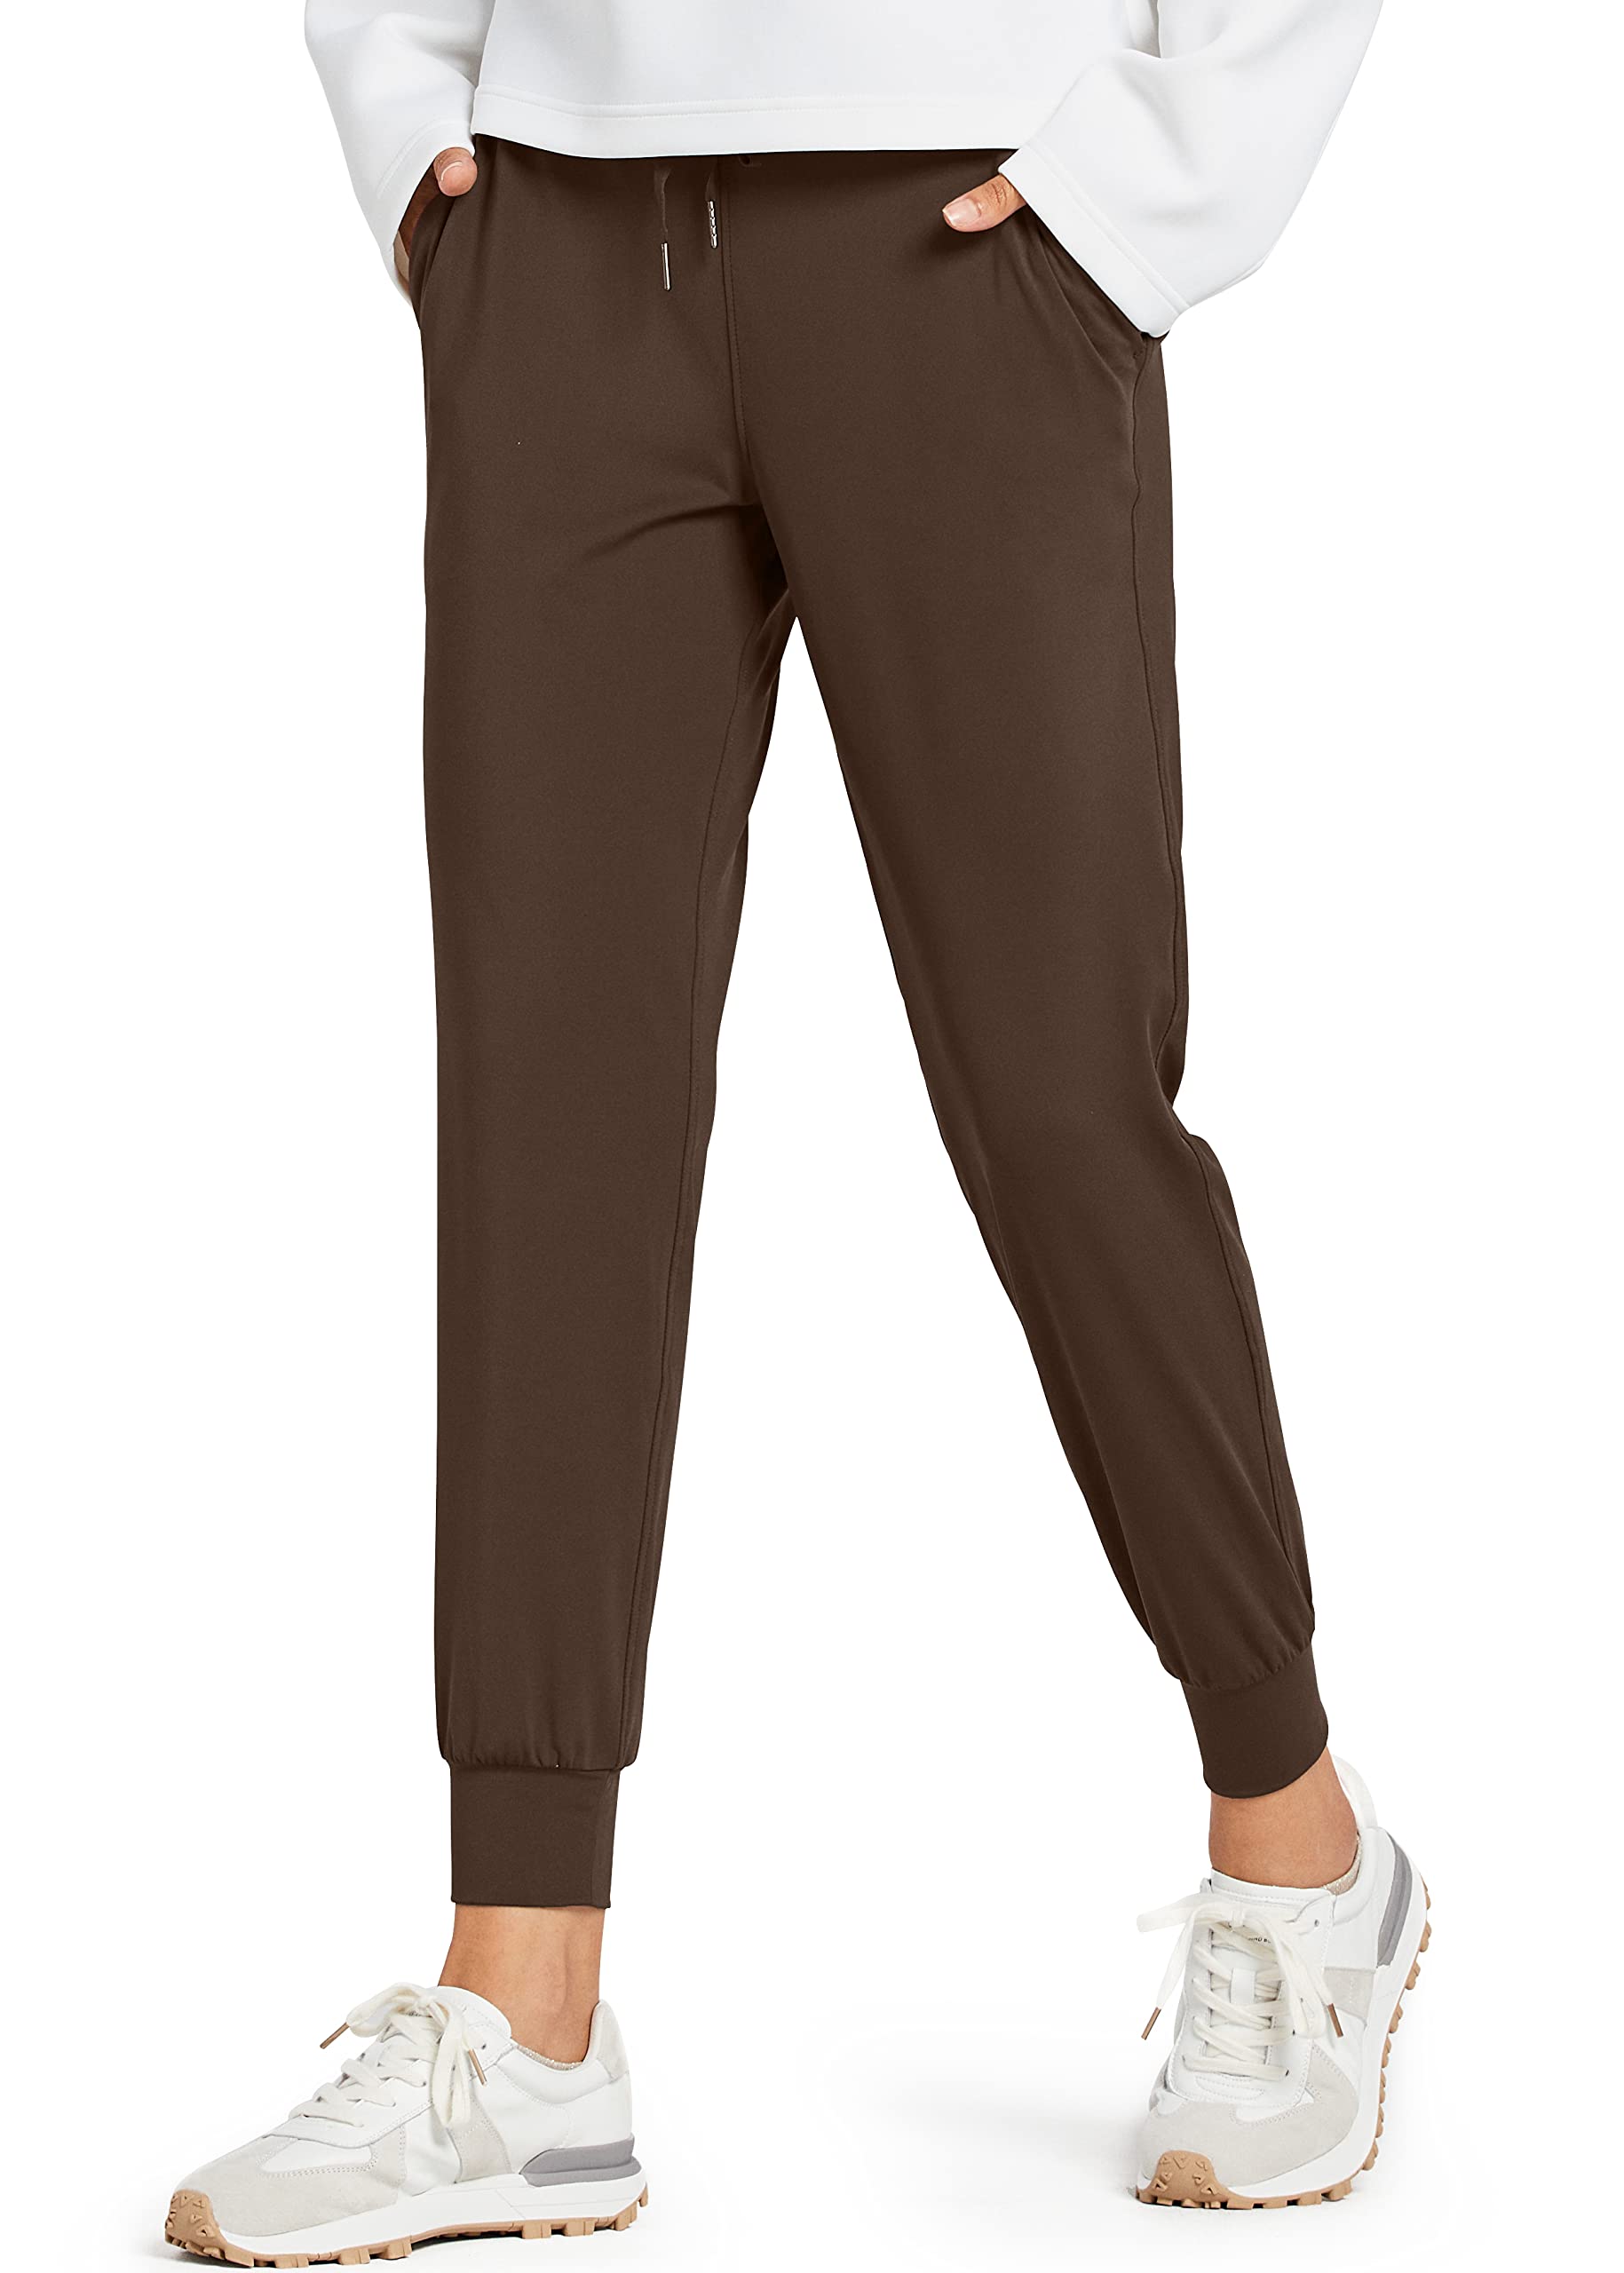 Libin Womens Joggers Pants Athletic Sweatpants with Pockets Running Tapered casual Pants for Workout,Lounge, Brown M